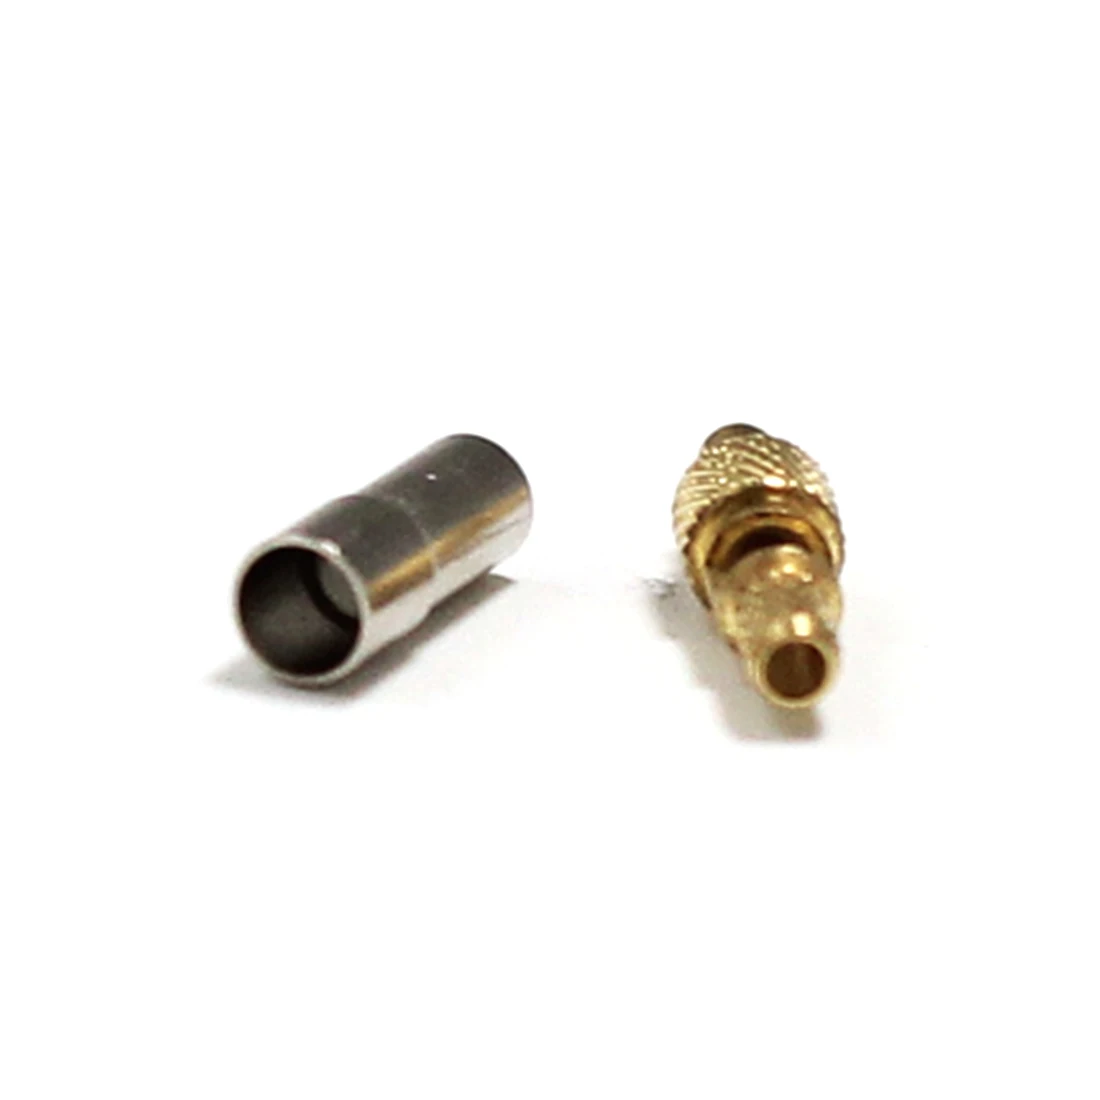 New  MMCX Male Plug  RF Coax Convertor Connector  Crimp For RG178 Cable Wholesale Straight Goldplated Wire Terminal